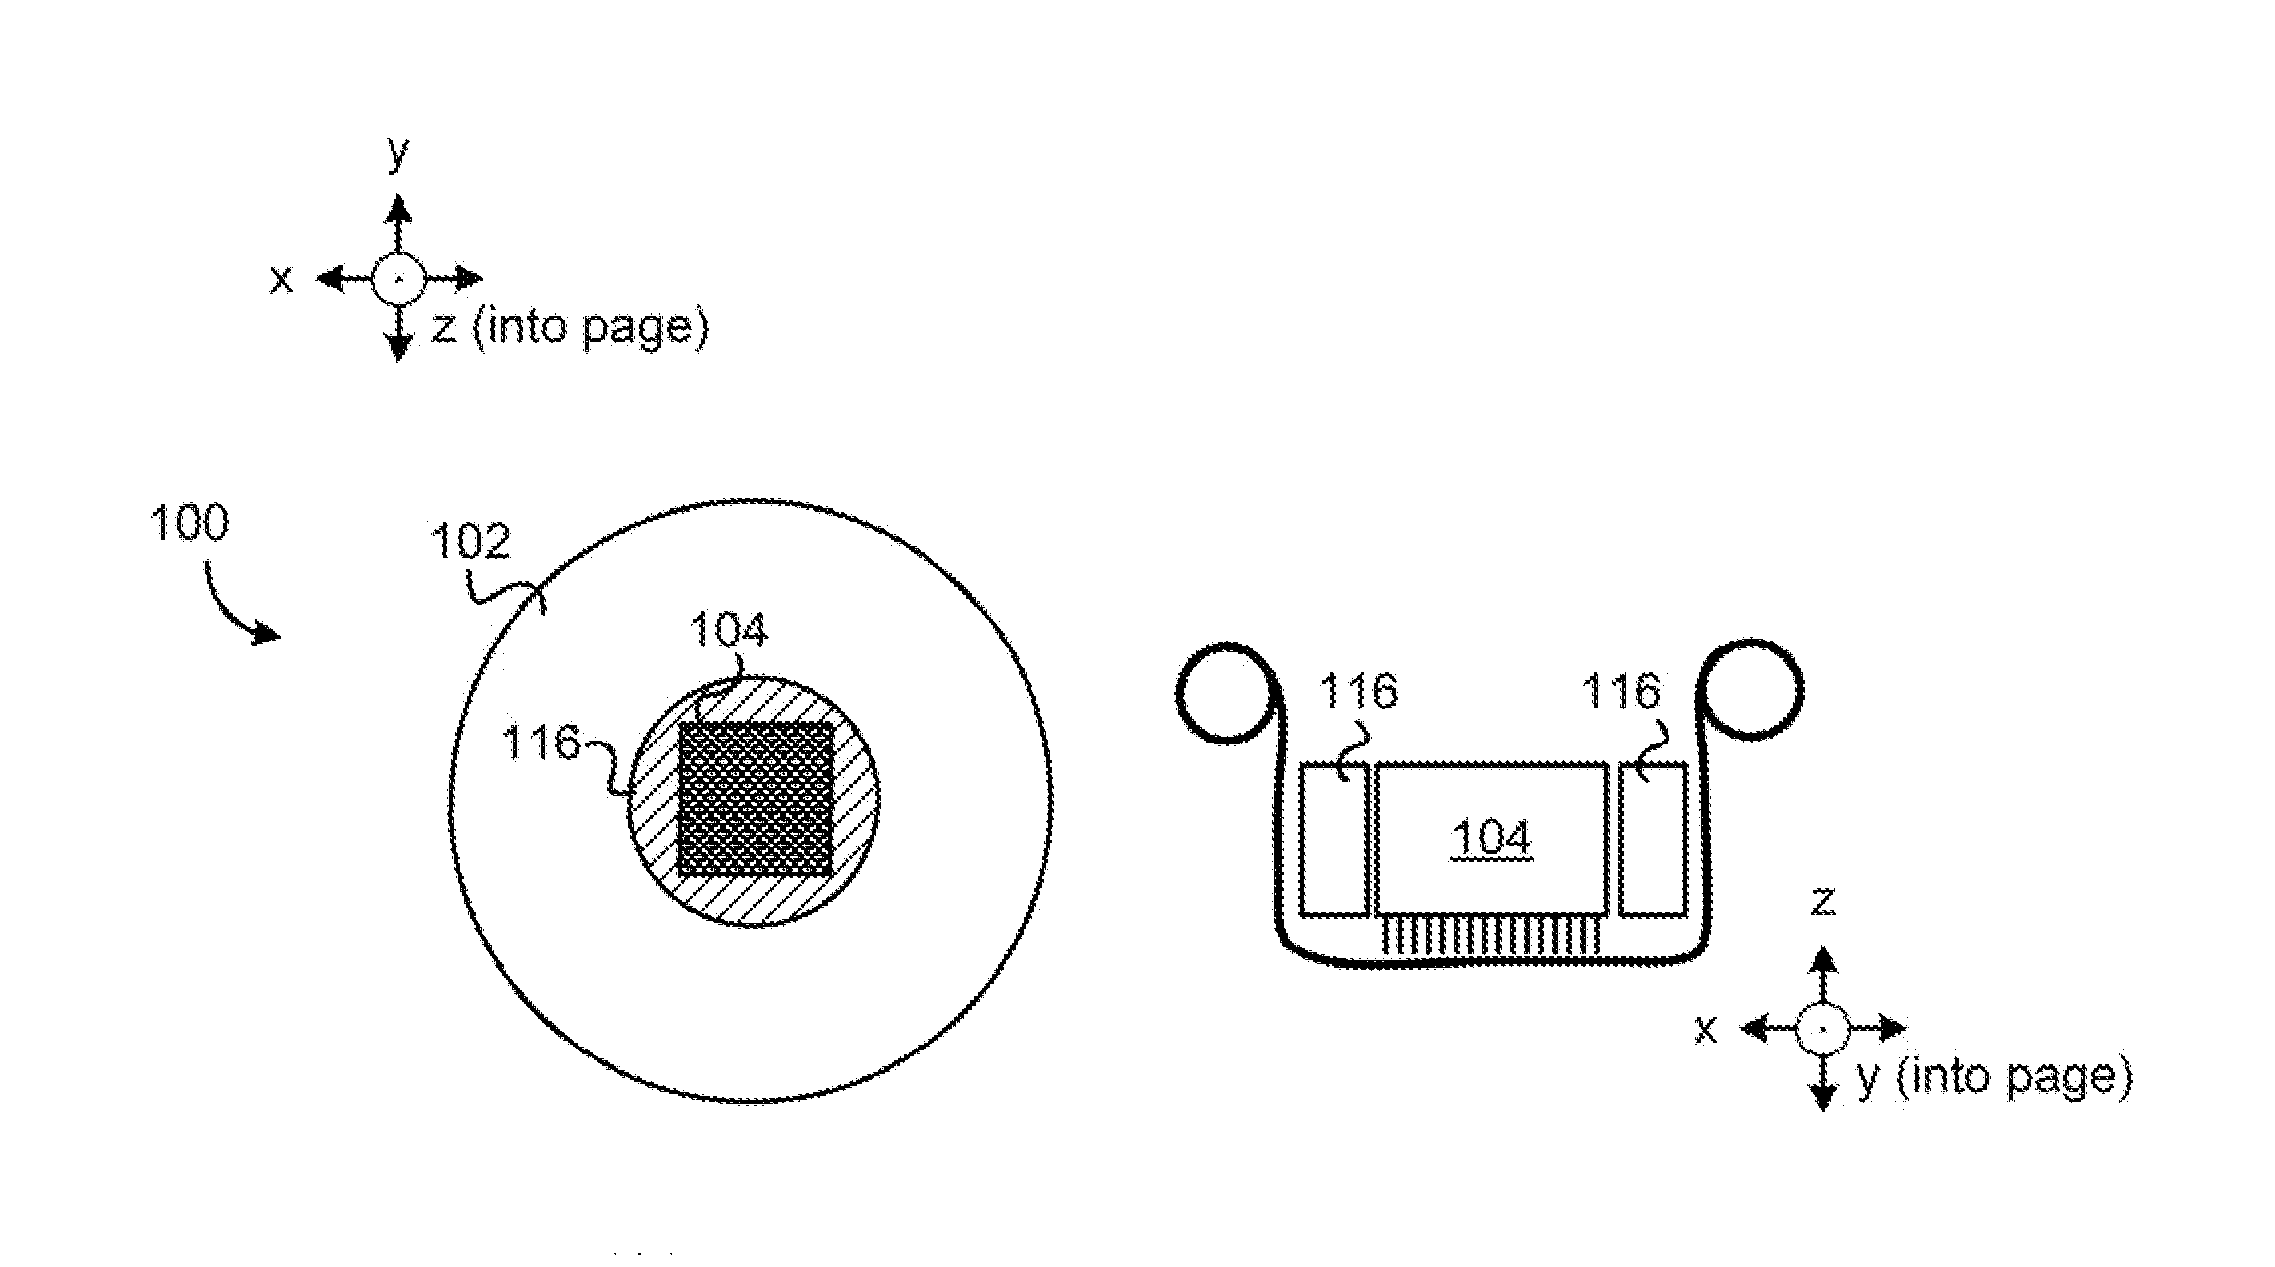 Arbitrary Surface Printing Device for Untethered Multi-Pass Printing